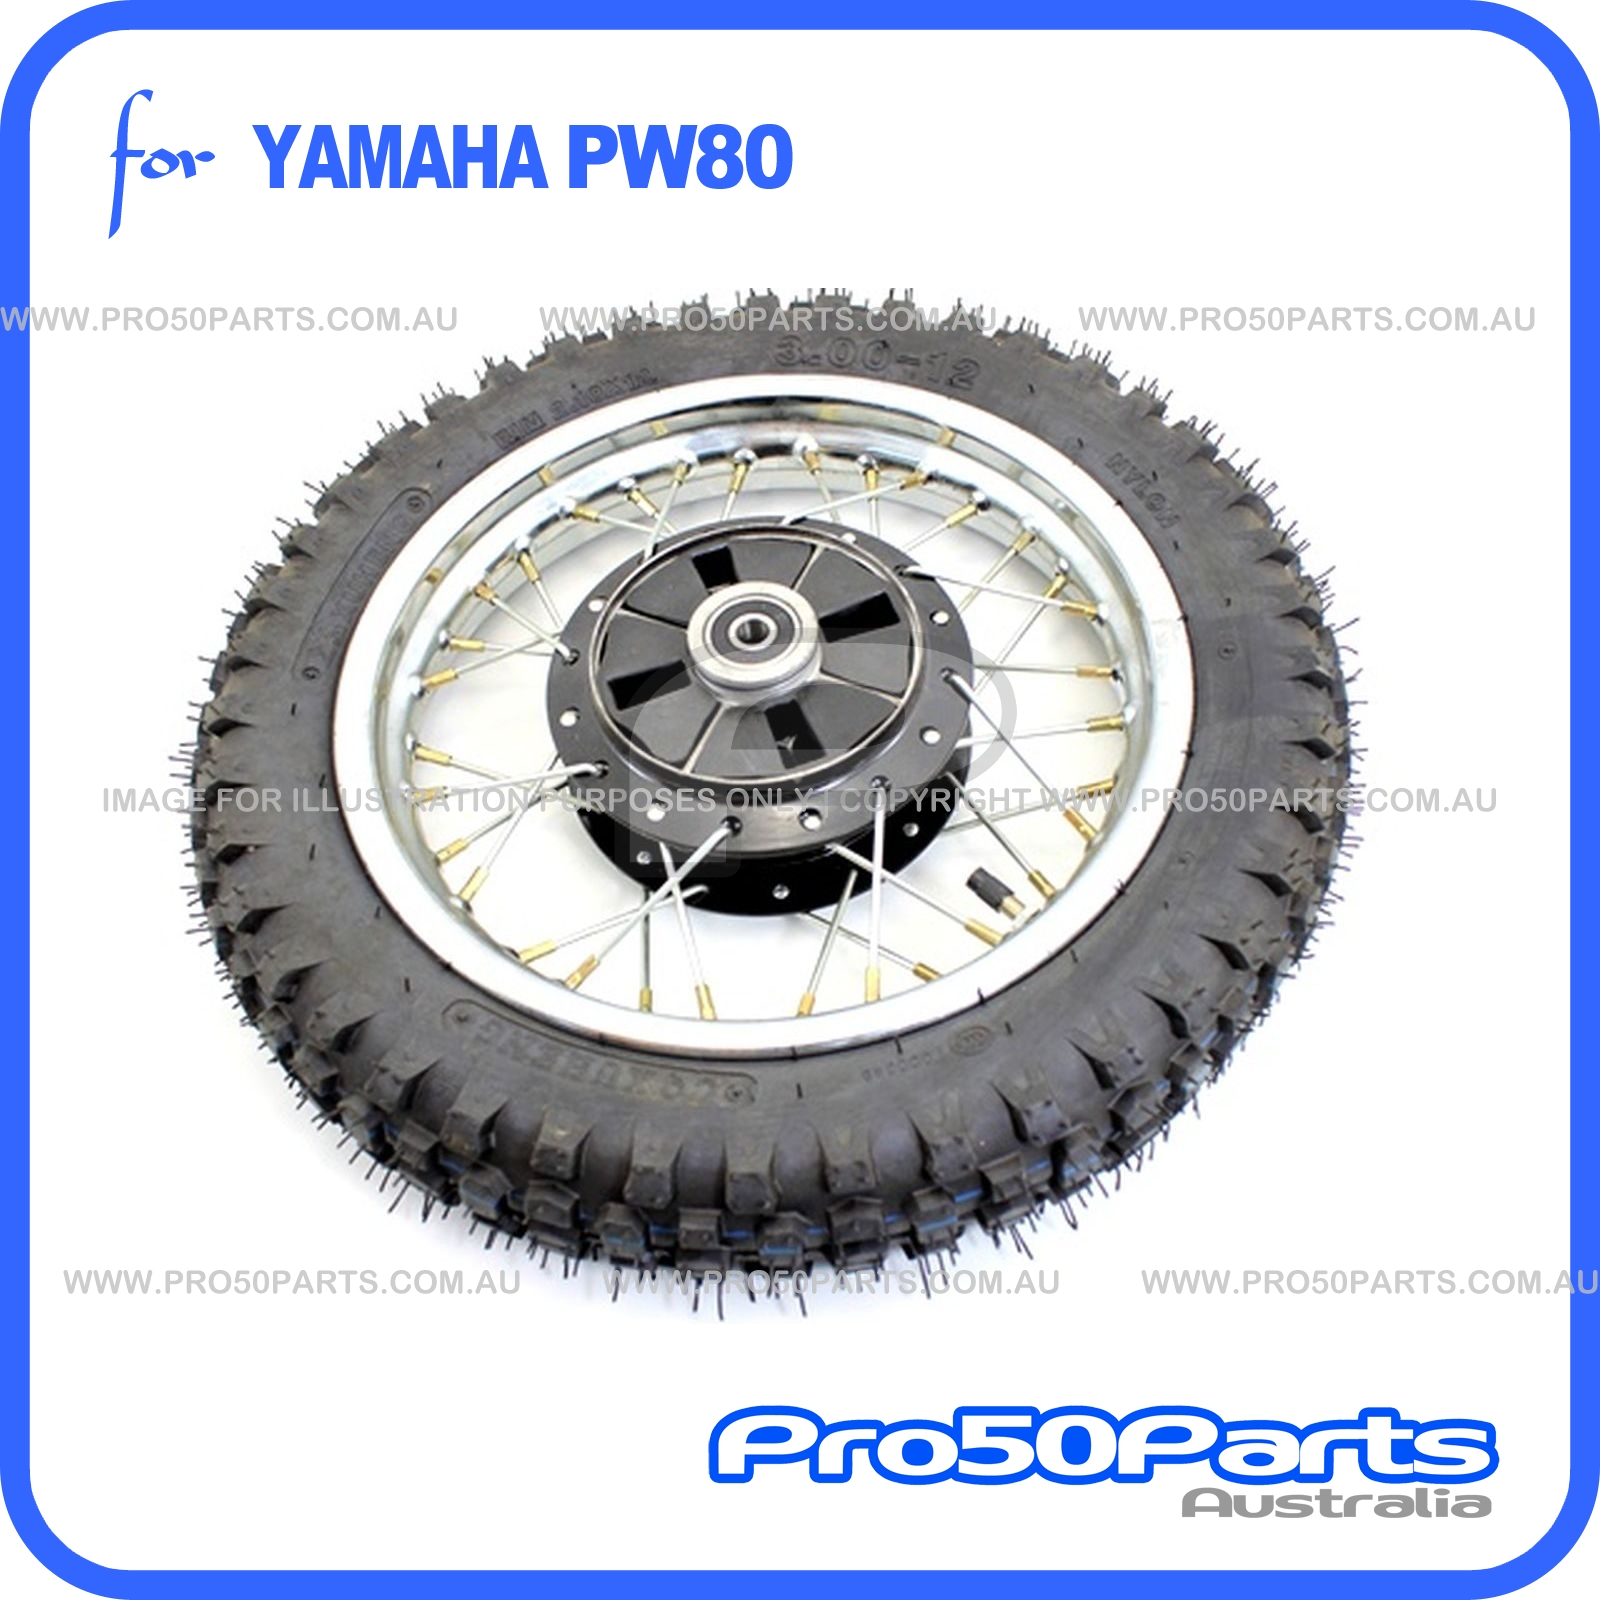 83-97 Front Brake Shoes For Yamaha PW80 PW 80 Y-Zinger